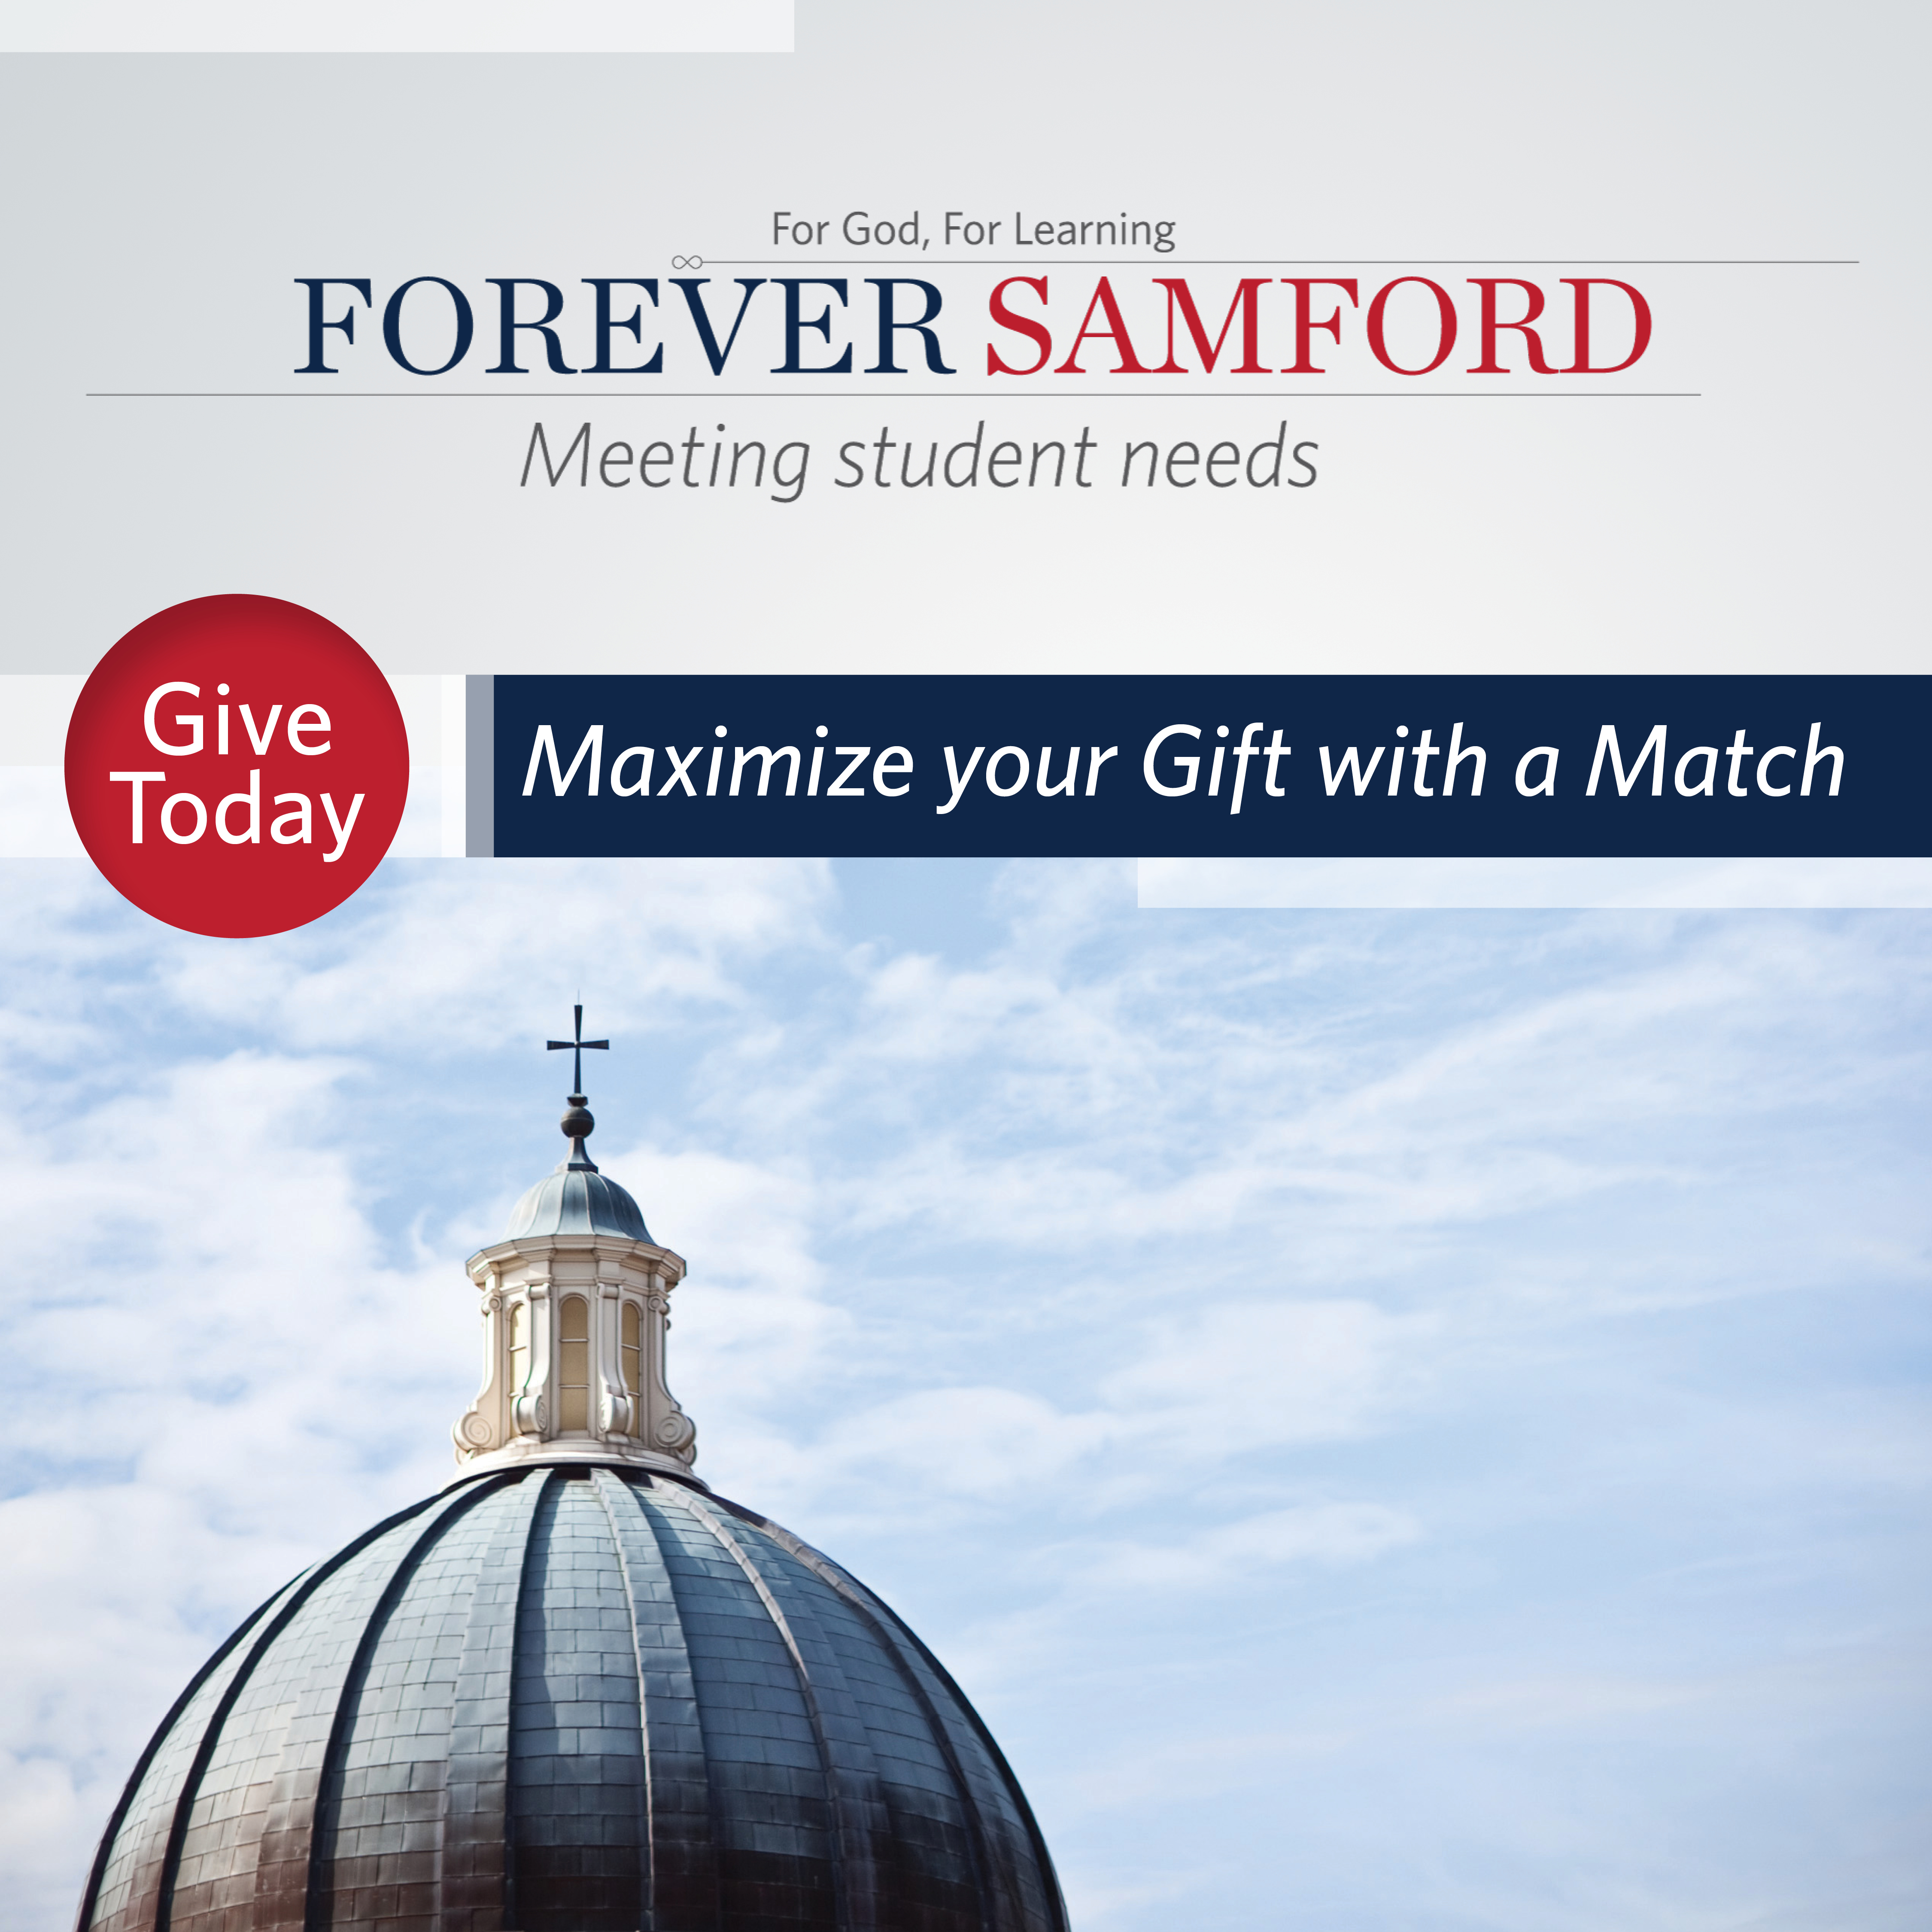 Maximize your gift with a match!